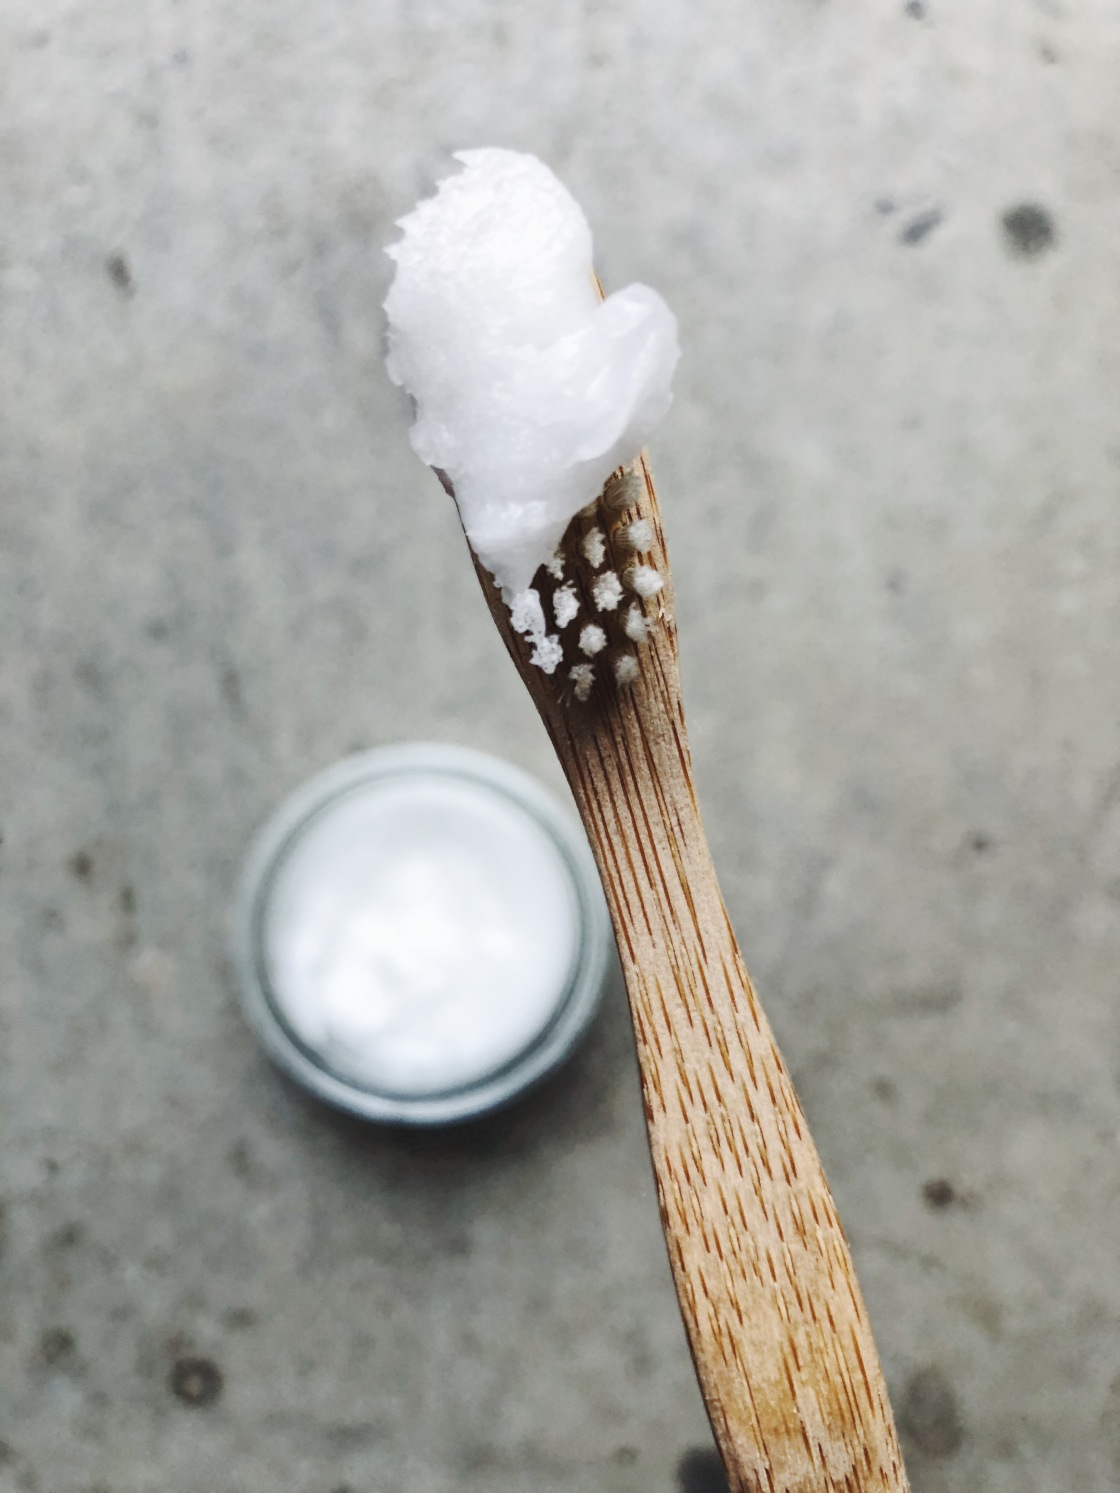 Coconut oil toothpaste